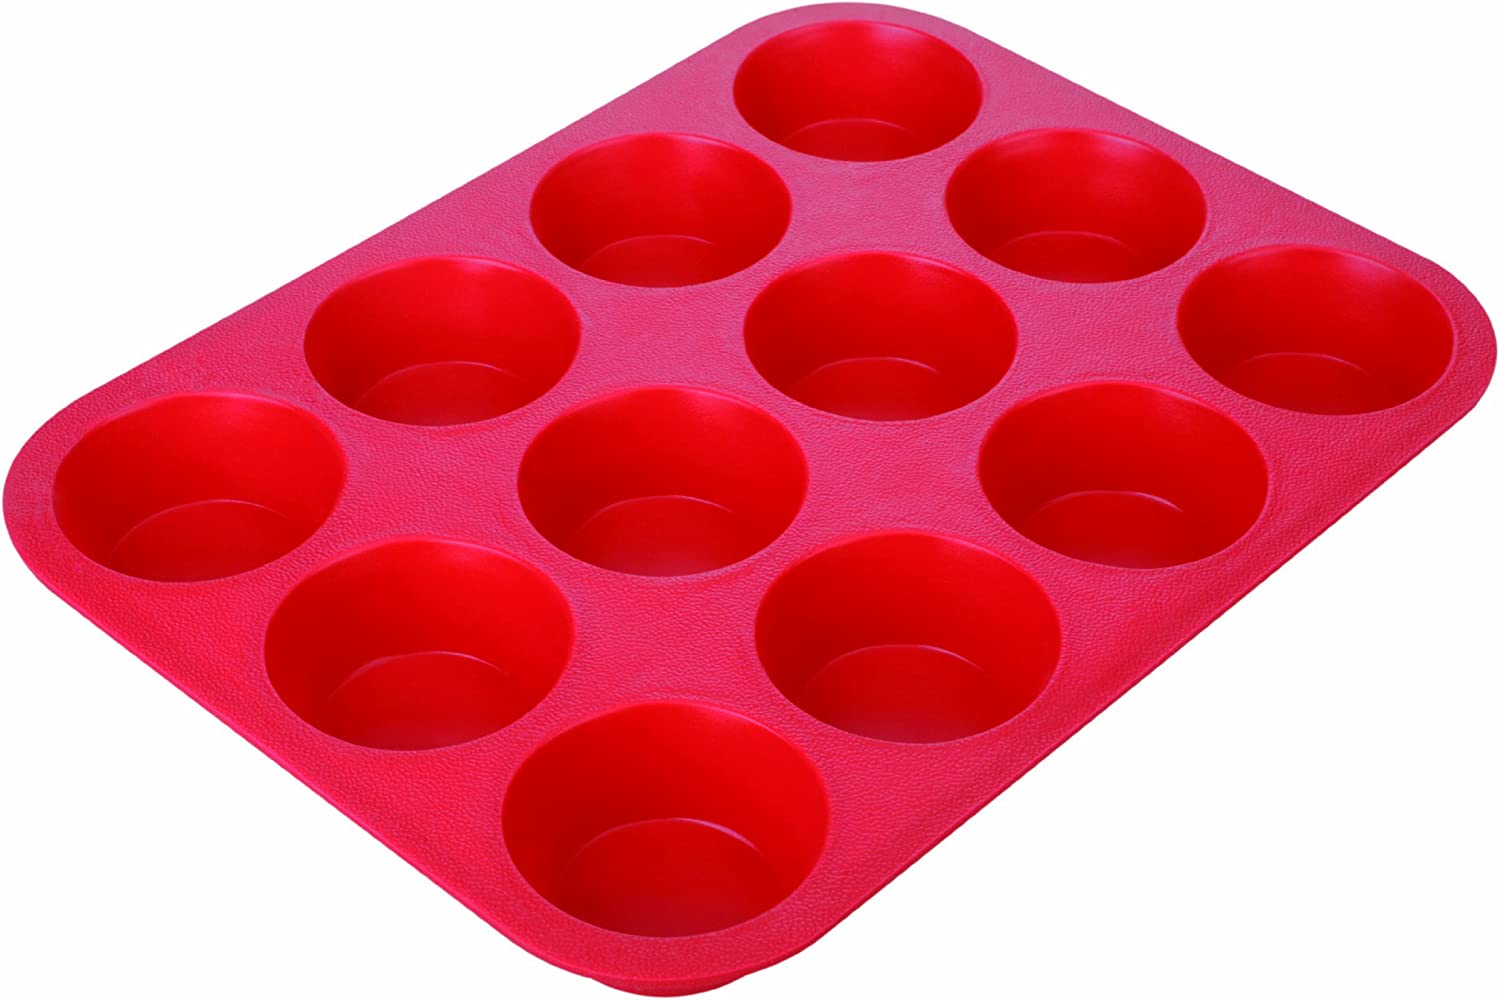 Tescoma Delicia Silicone Baking Pan, 12 Cup Muffin Tray